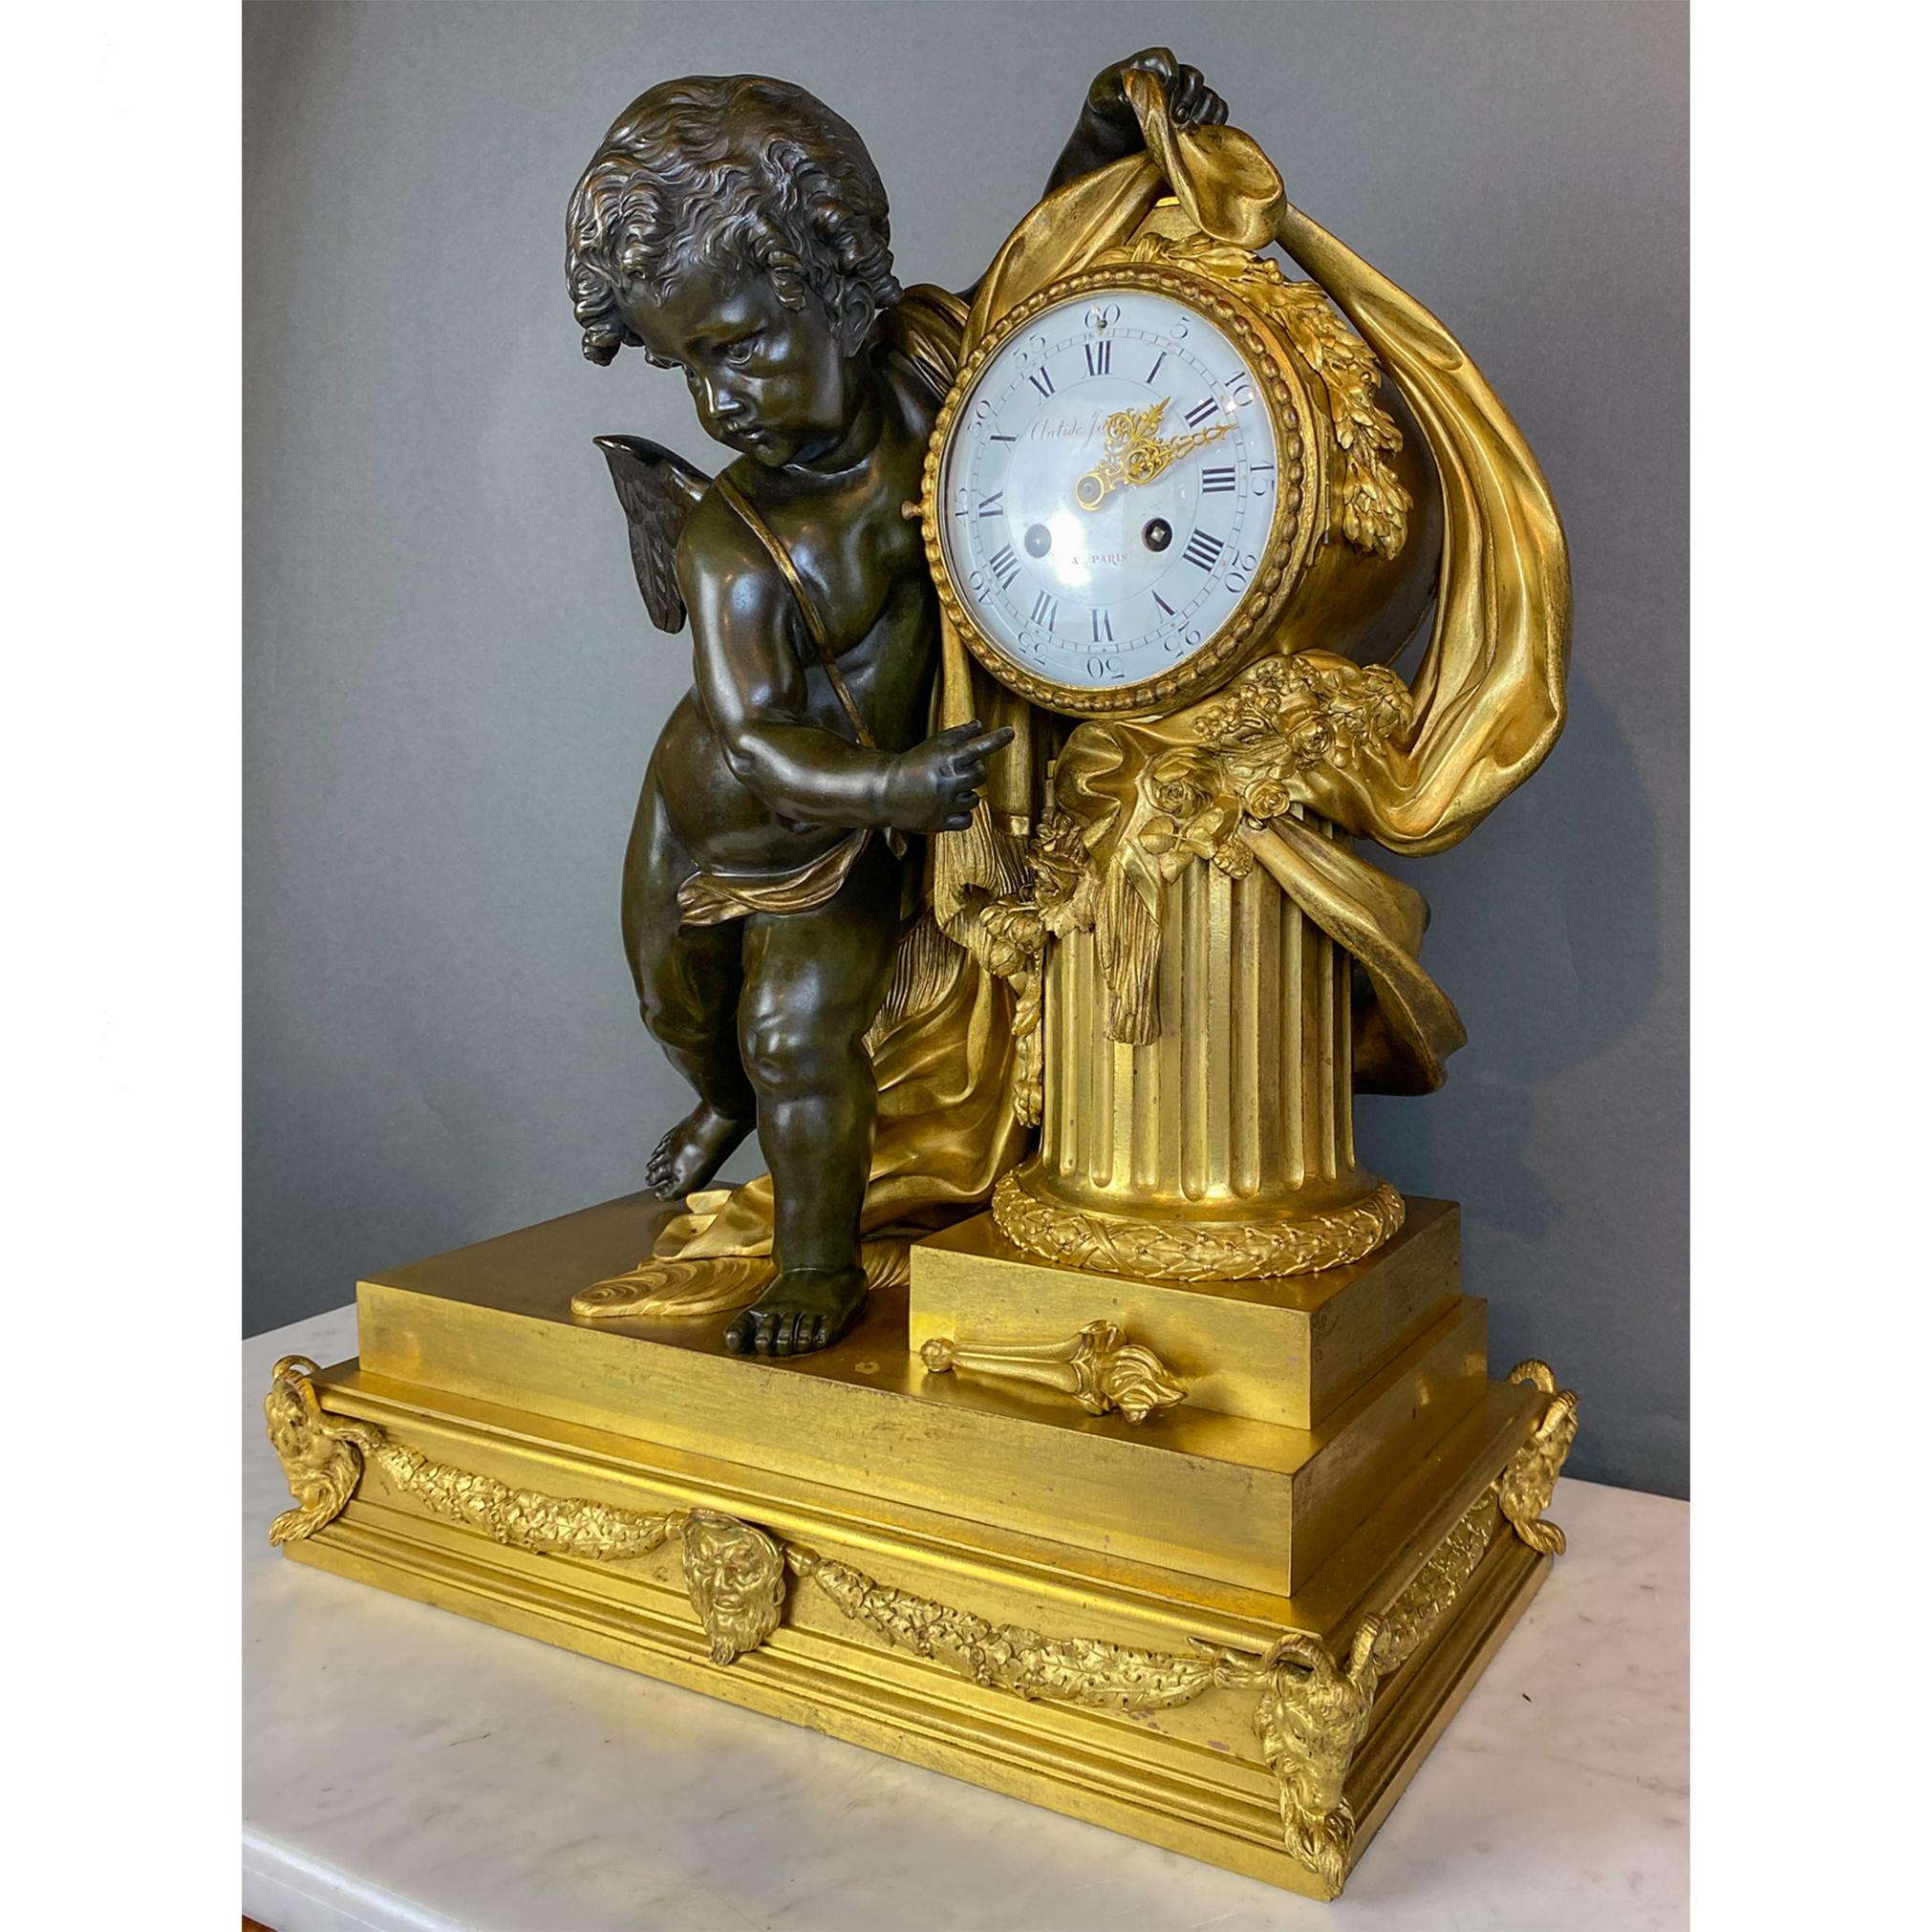 An exquisite figural bronze mantel clock with Putti leaning on clock face which sits on a fluted column draped in garlands and fabrics. Sitting on a rectangular base ornamented with garlands and goat heads. 

Clock Maker: Antide Janvier

Origin: